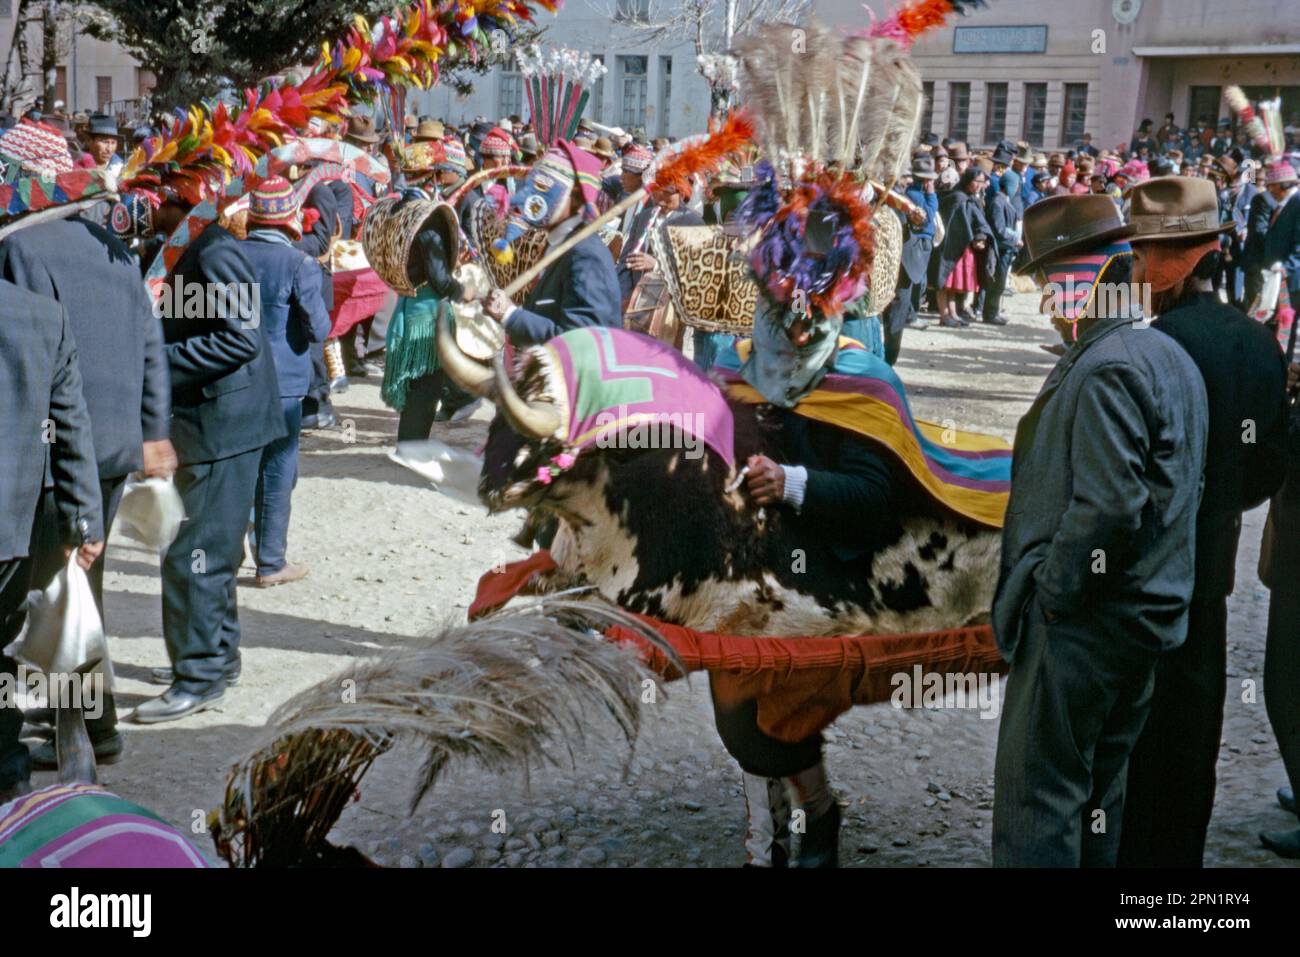 A festival in the streets of Achacachi, Bolivia in 1968. Colourful festivals and carnivals play a large part in Bolivian cultural life – many are related to religious beliefs and ancient customs. Here a man (centre) is dressed up as a bull. Achacachi is a town on the Altiplano plateau in the South American Andes and existed before the arrival of the Spaniards – a vintage 1960s photograph. Stock Photo